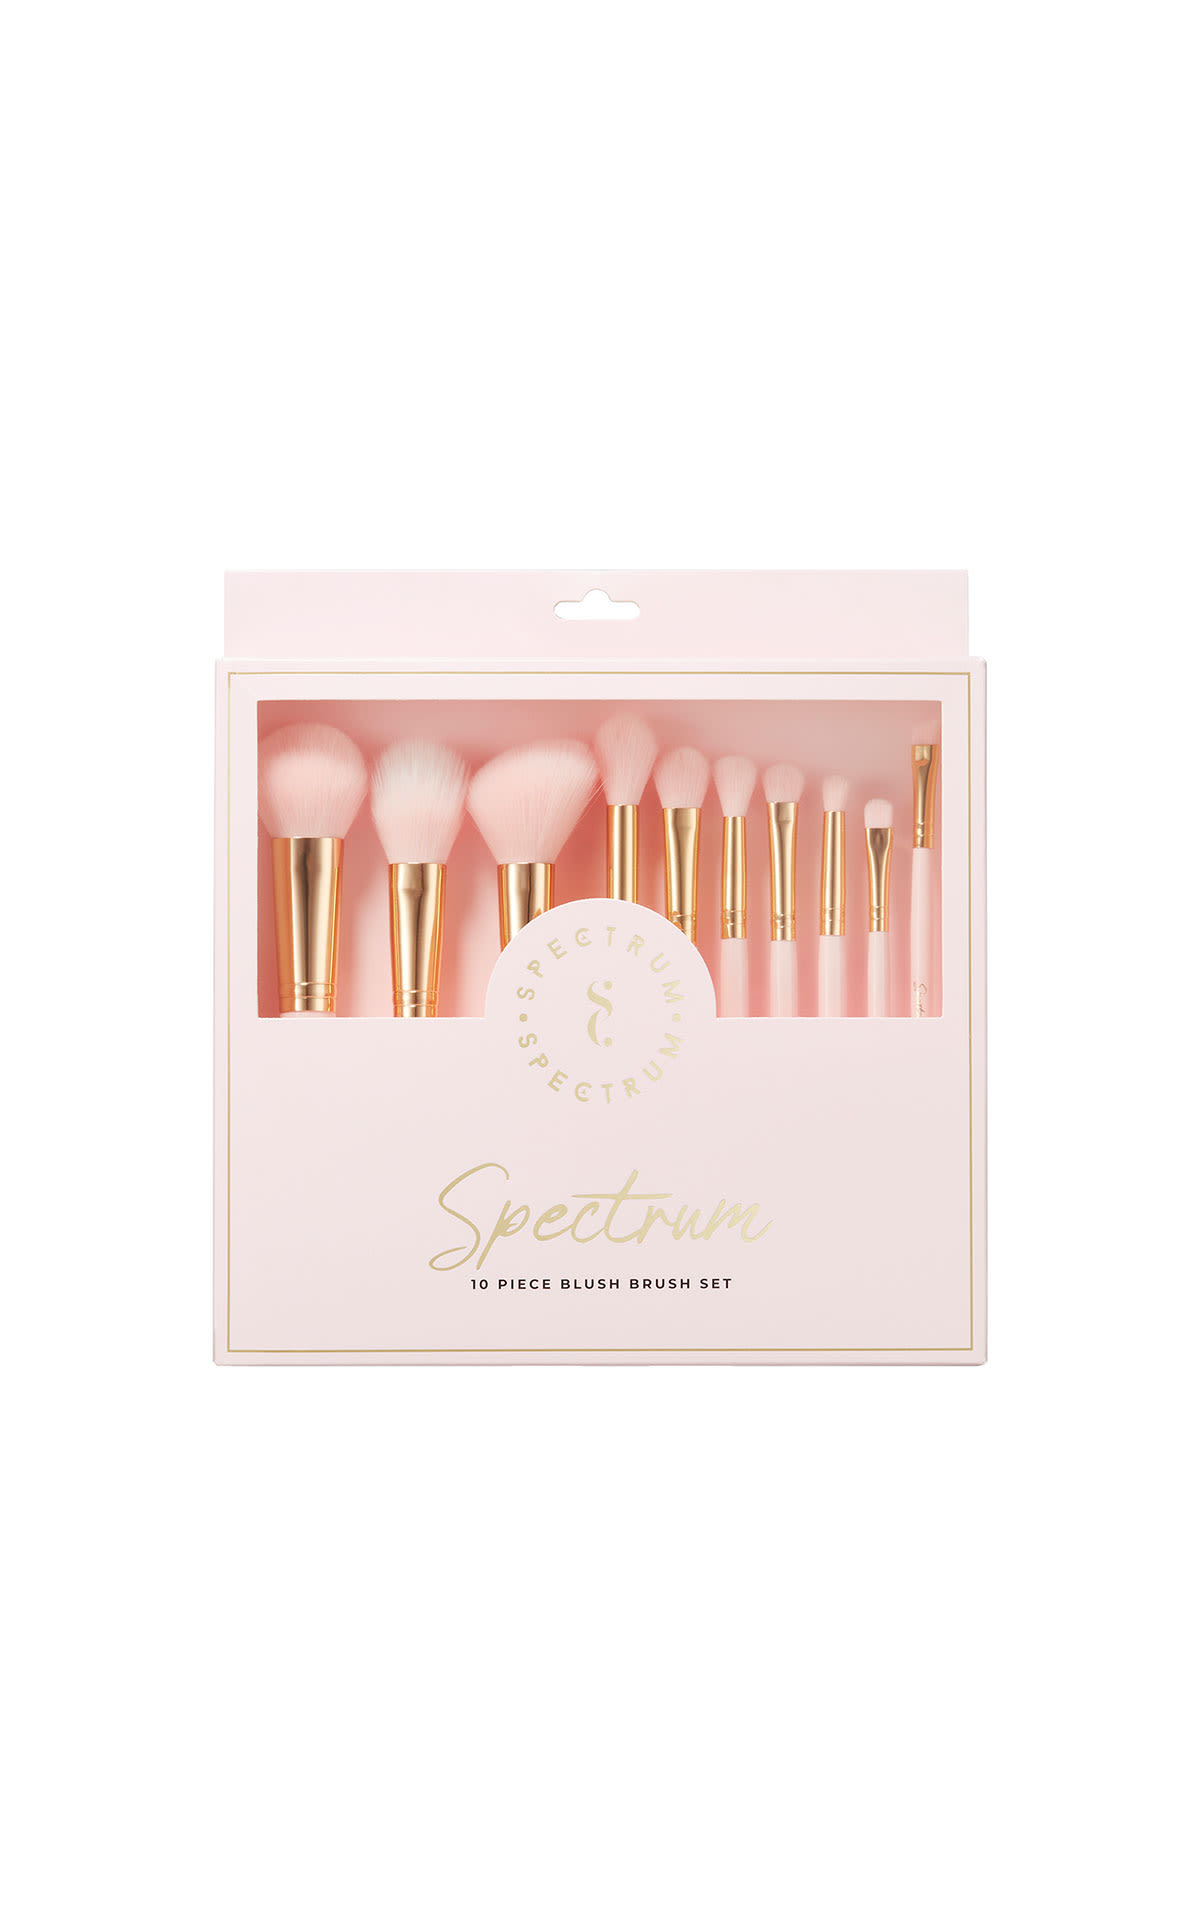 Spectrum Collections Blush 10 piece set from Bicester Village